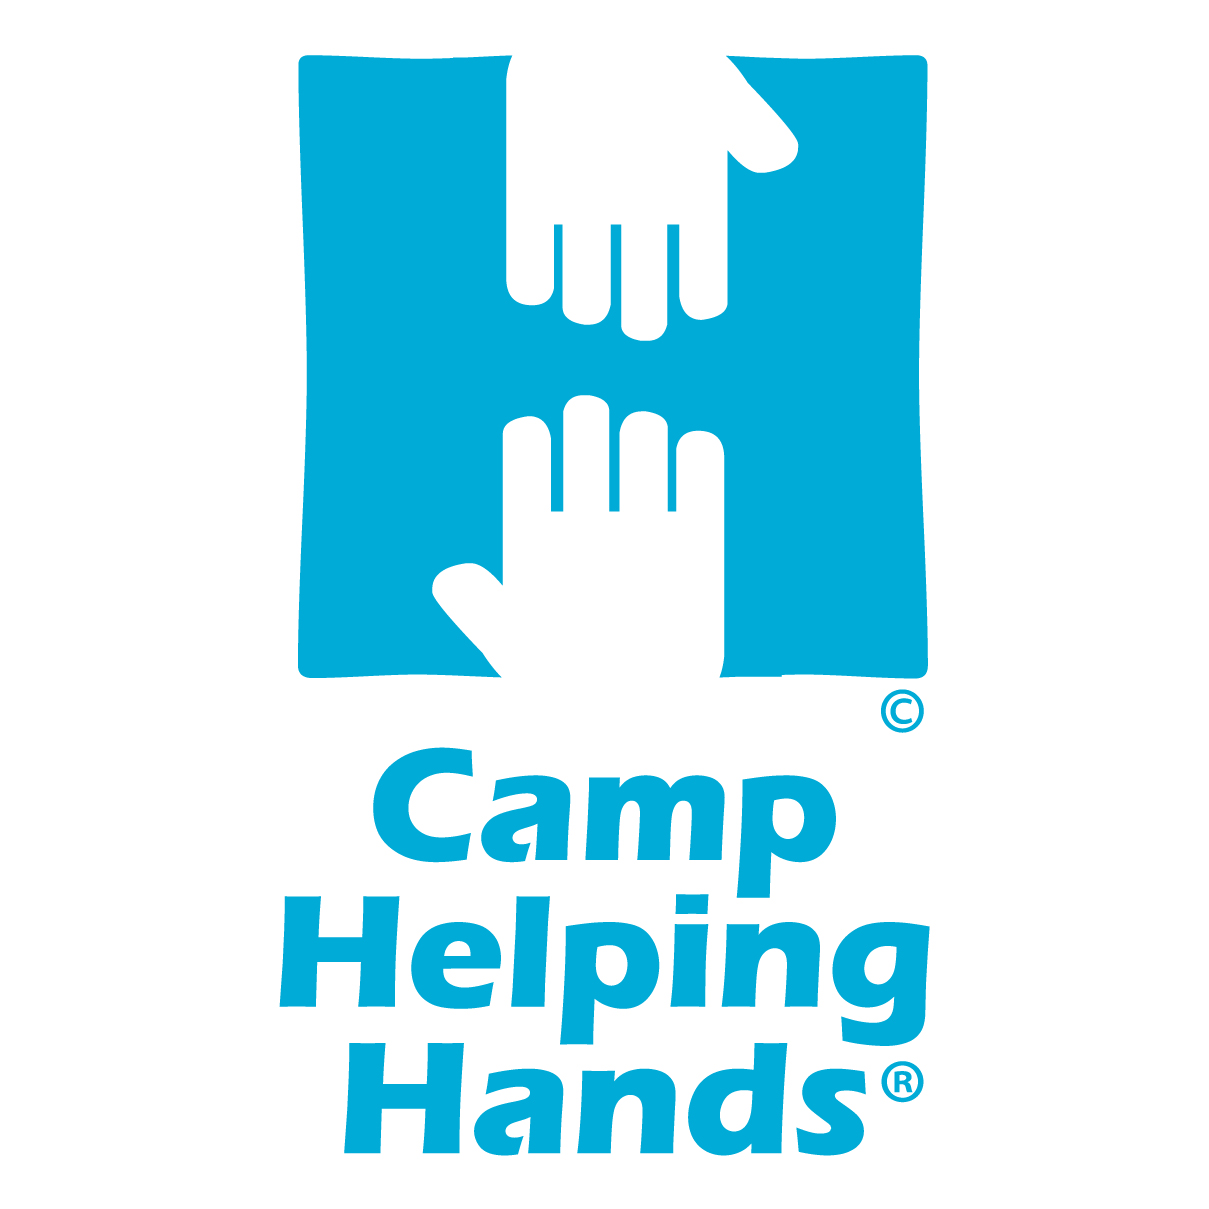 Camp Helping Hands